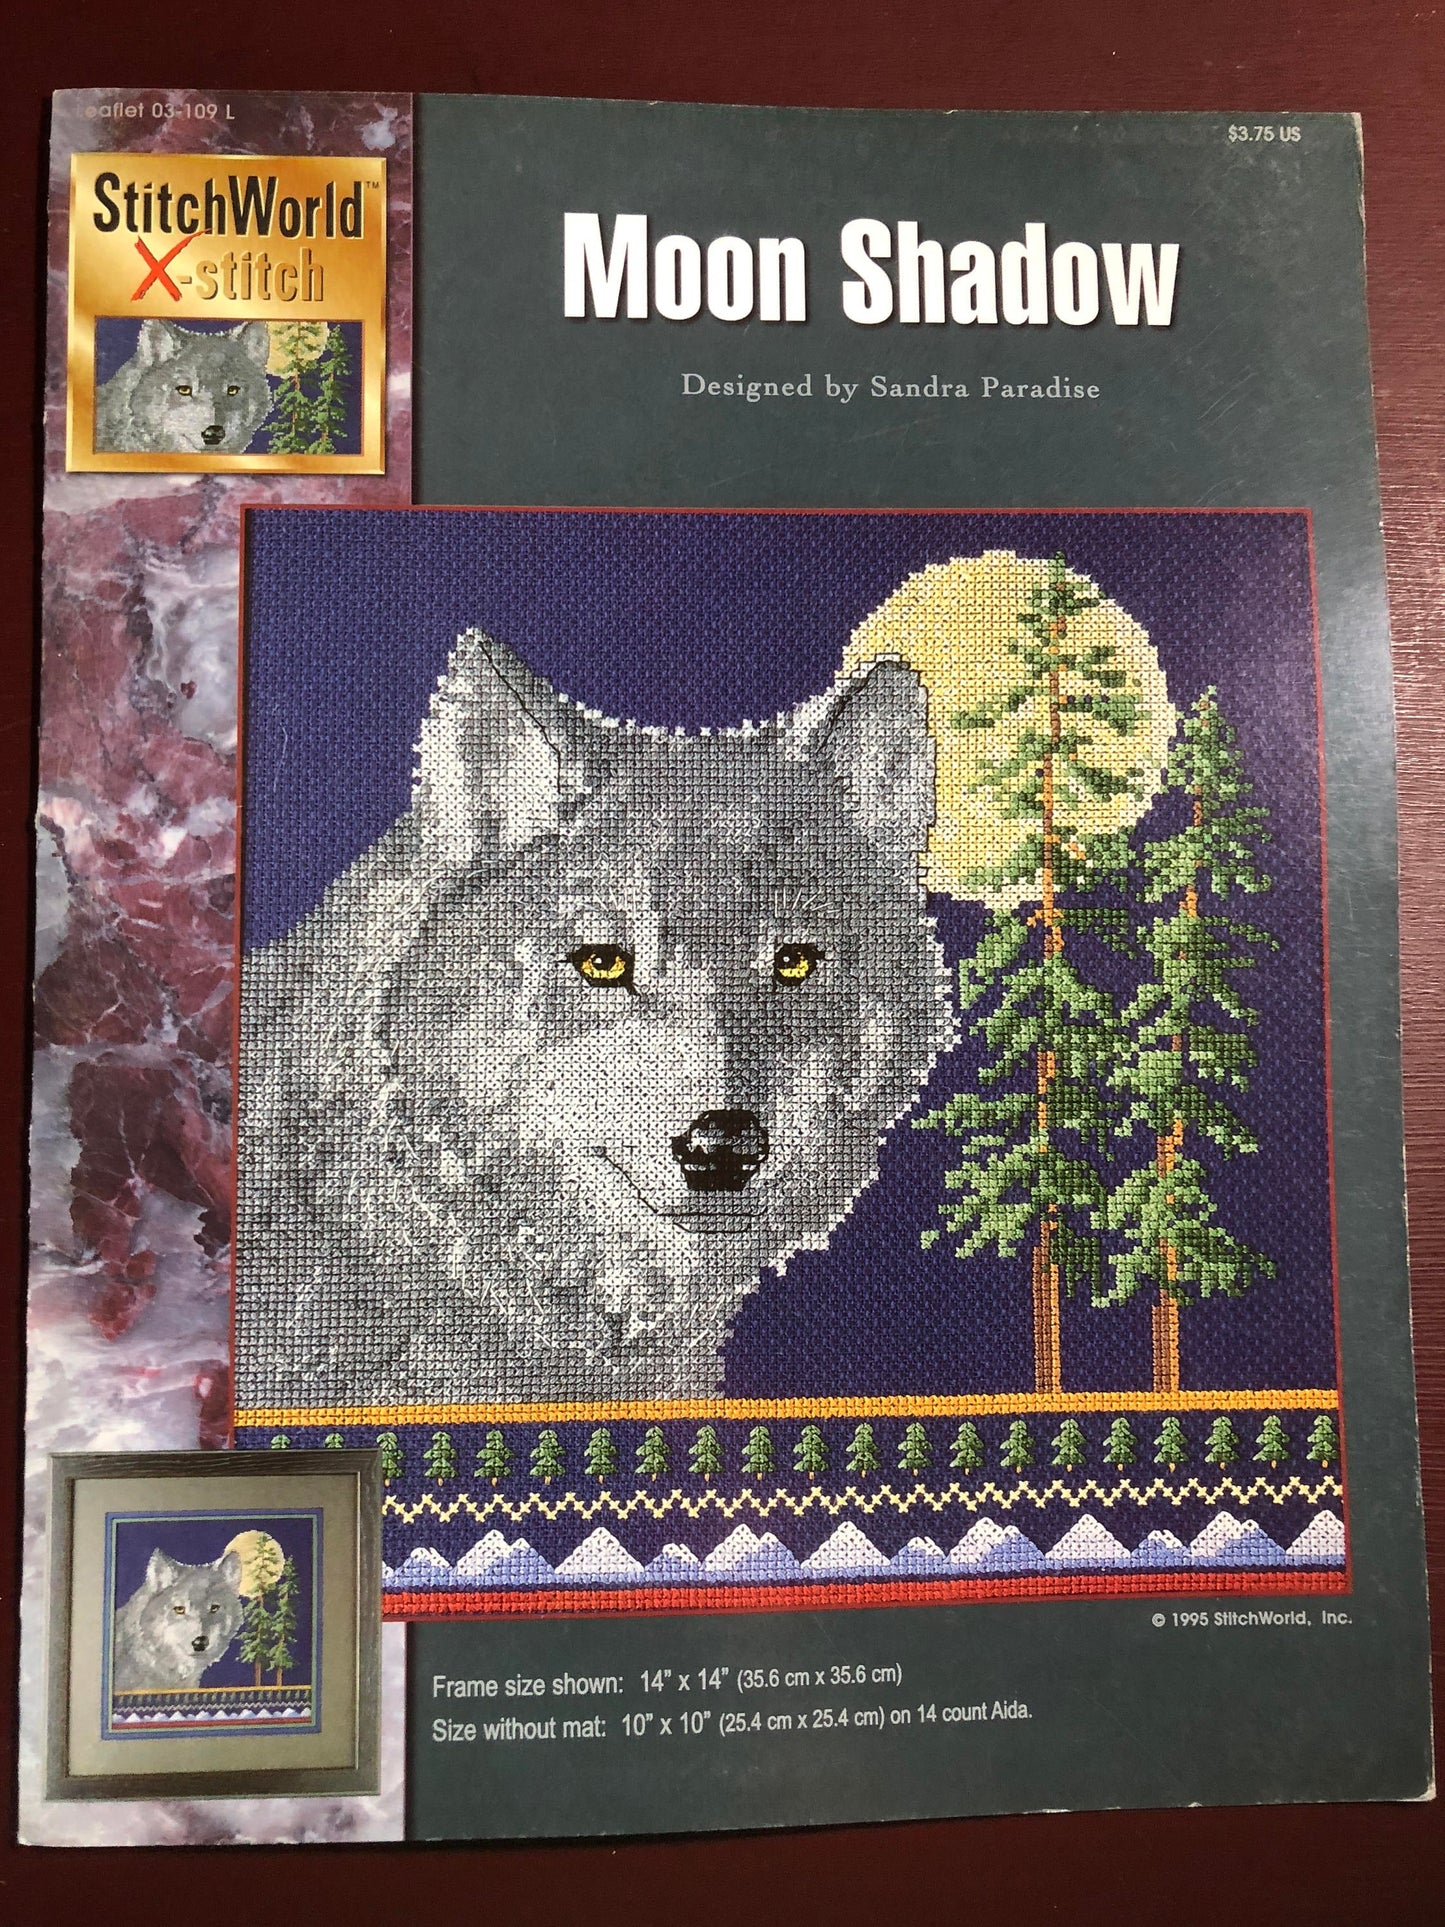 Stitch World, X-stitch, Moon Shadow,Designed by, Sandra Paradise, Leaflet 03-109 L counted cross stitch pattern in color, Vintage ,1995